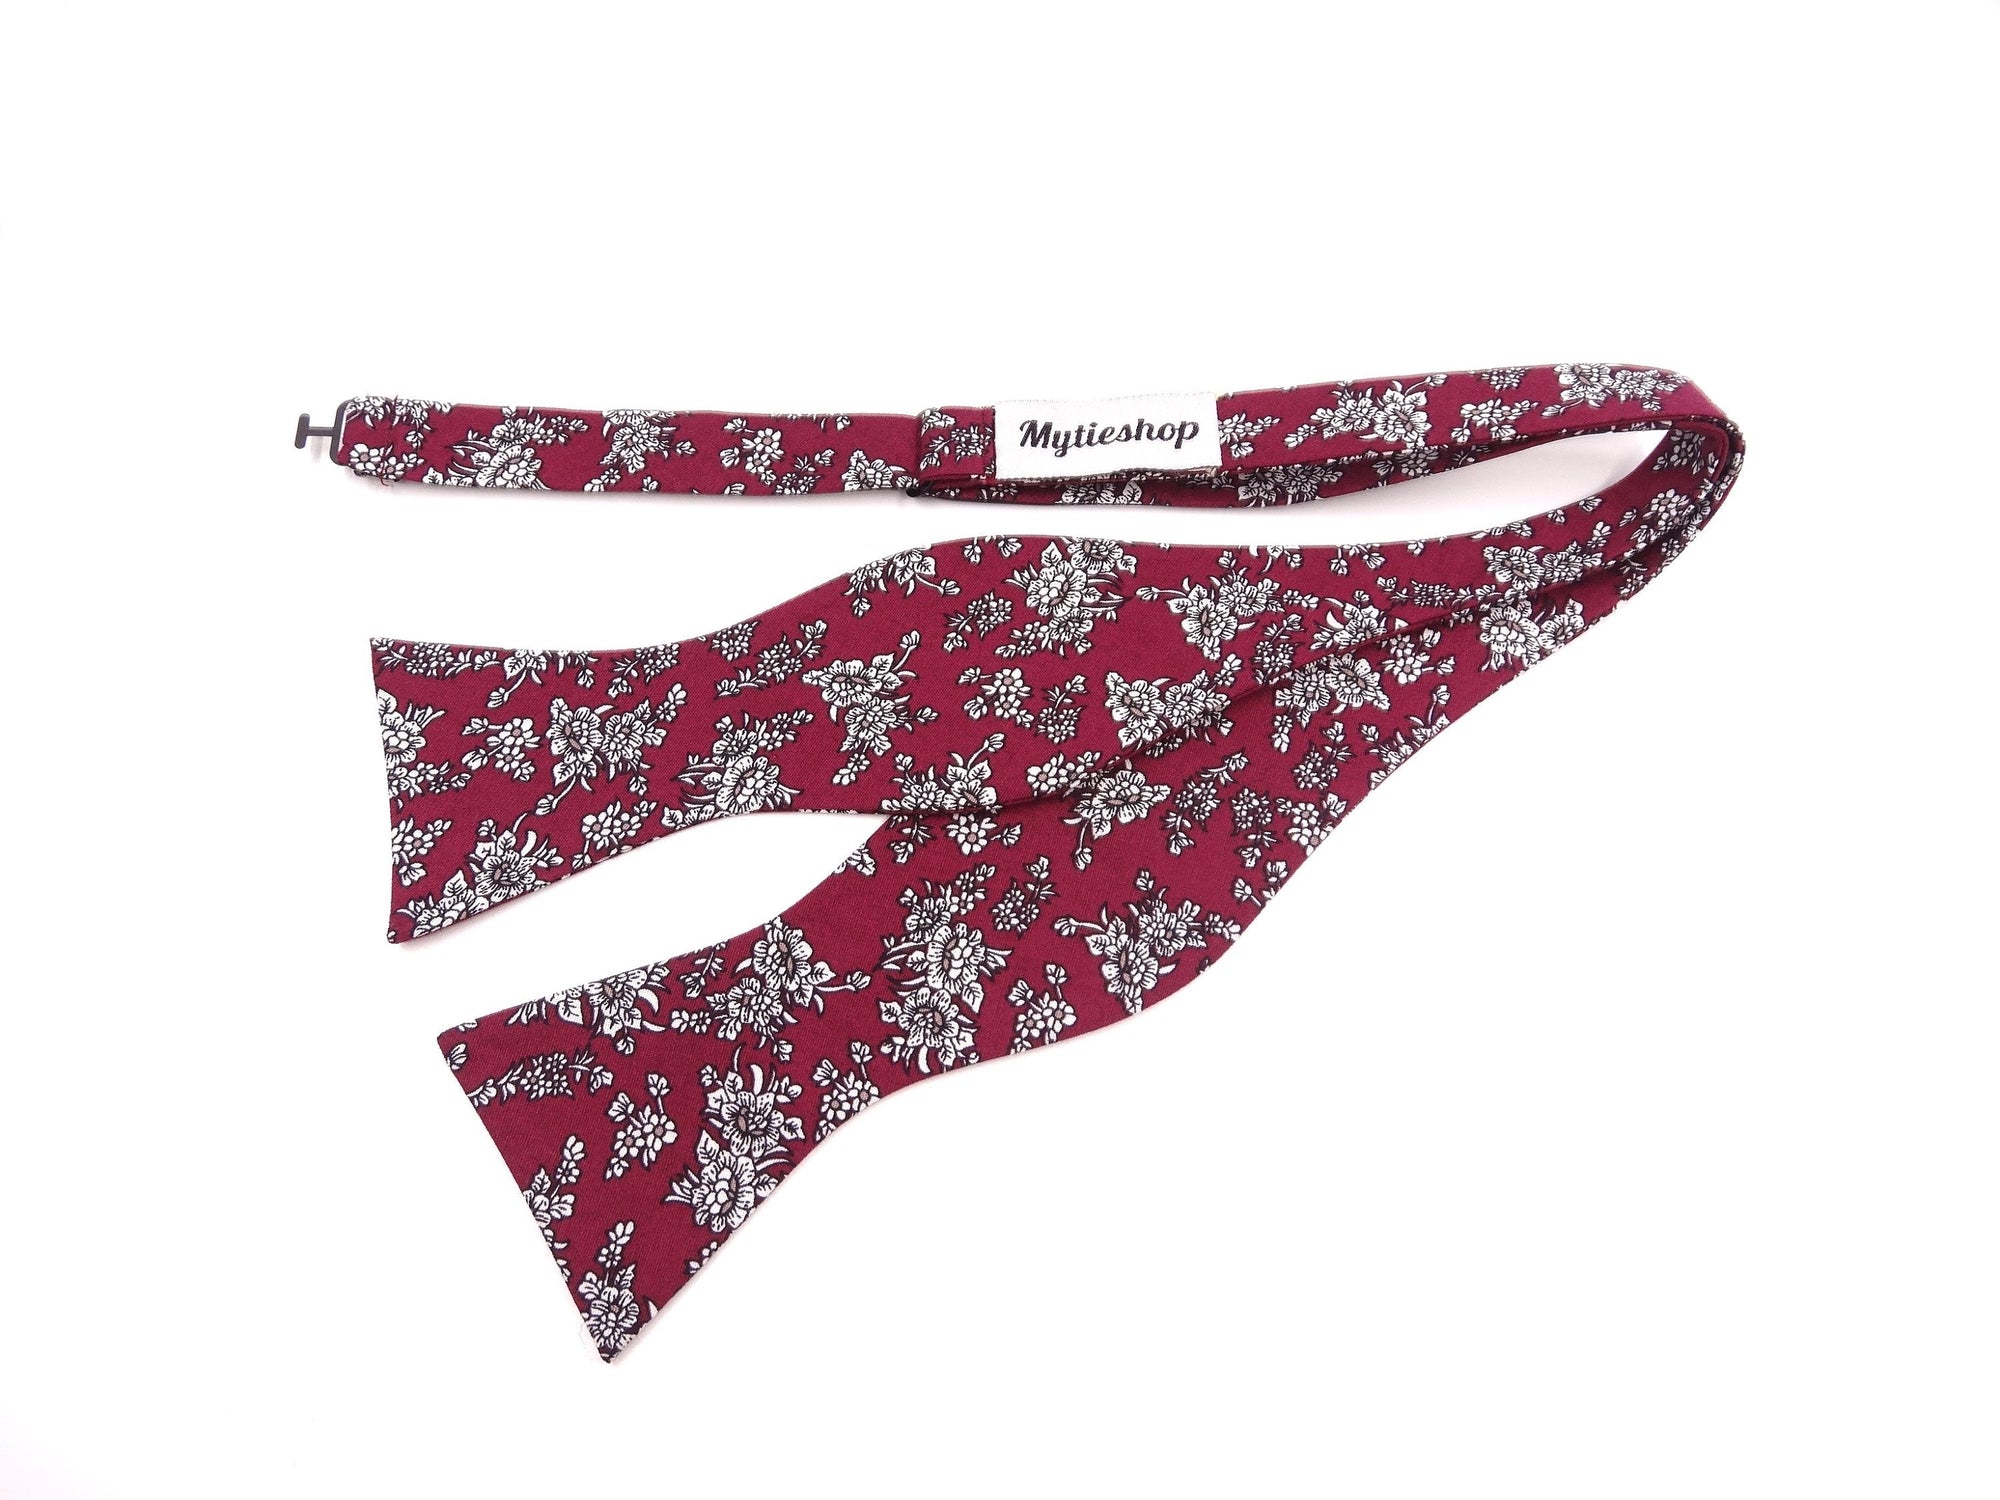 Maroon Floral Bow Tie Self Tie MYTIESHOP PRESTON-Maroon Floral Bow Tie Self Tie 100% Cotton Flannel Handmade Adjustable to fit most neck sizes 13 3/4&quot; - 18&quot; Color: Burgundy Great for Prom Dinners Interviews Photo shoots Photo sessions Dates Groom to stand out between his Groomsmen pair them up with neckties while he wears the bow tie. Floral self tie bow tie for weddings and events. Great anniversary present and gift. Also great gift for the groom and his groomsmen to wear at the wedding, and do